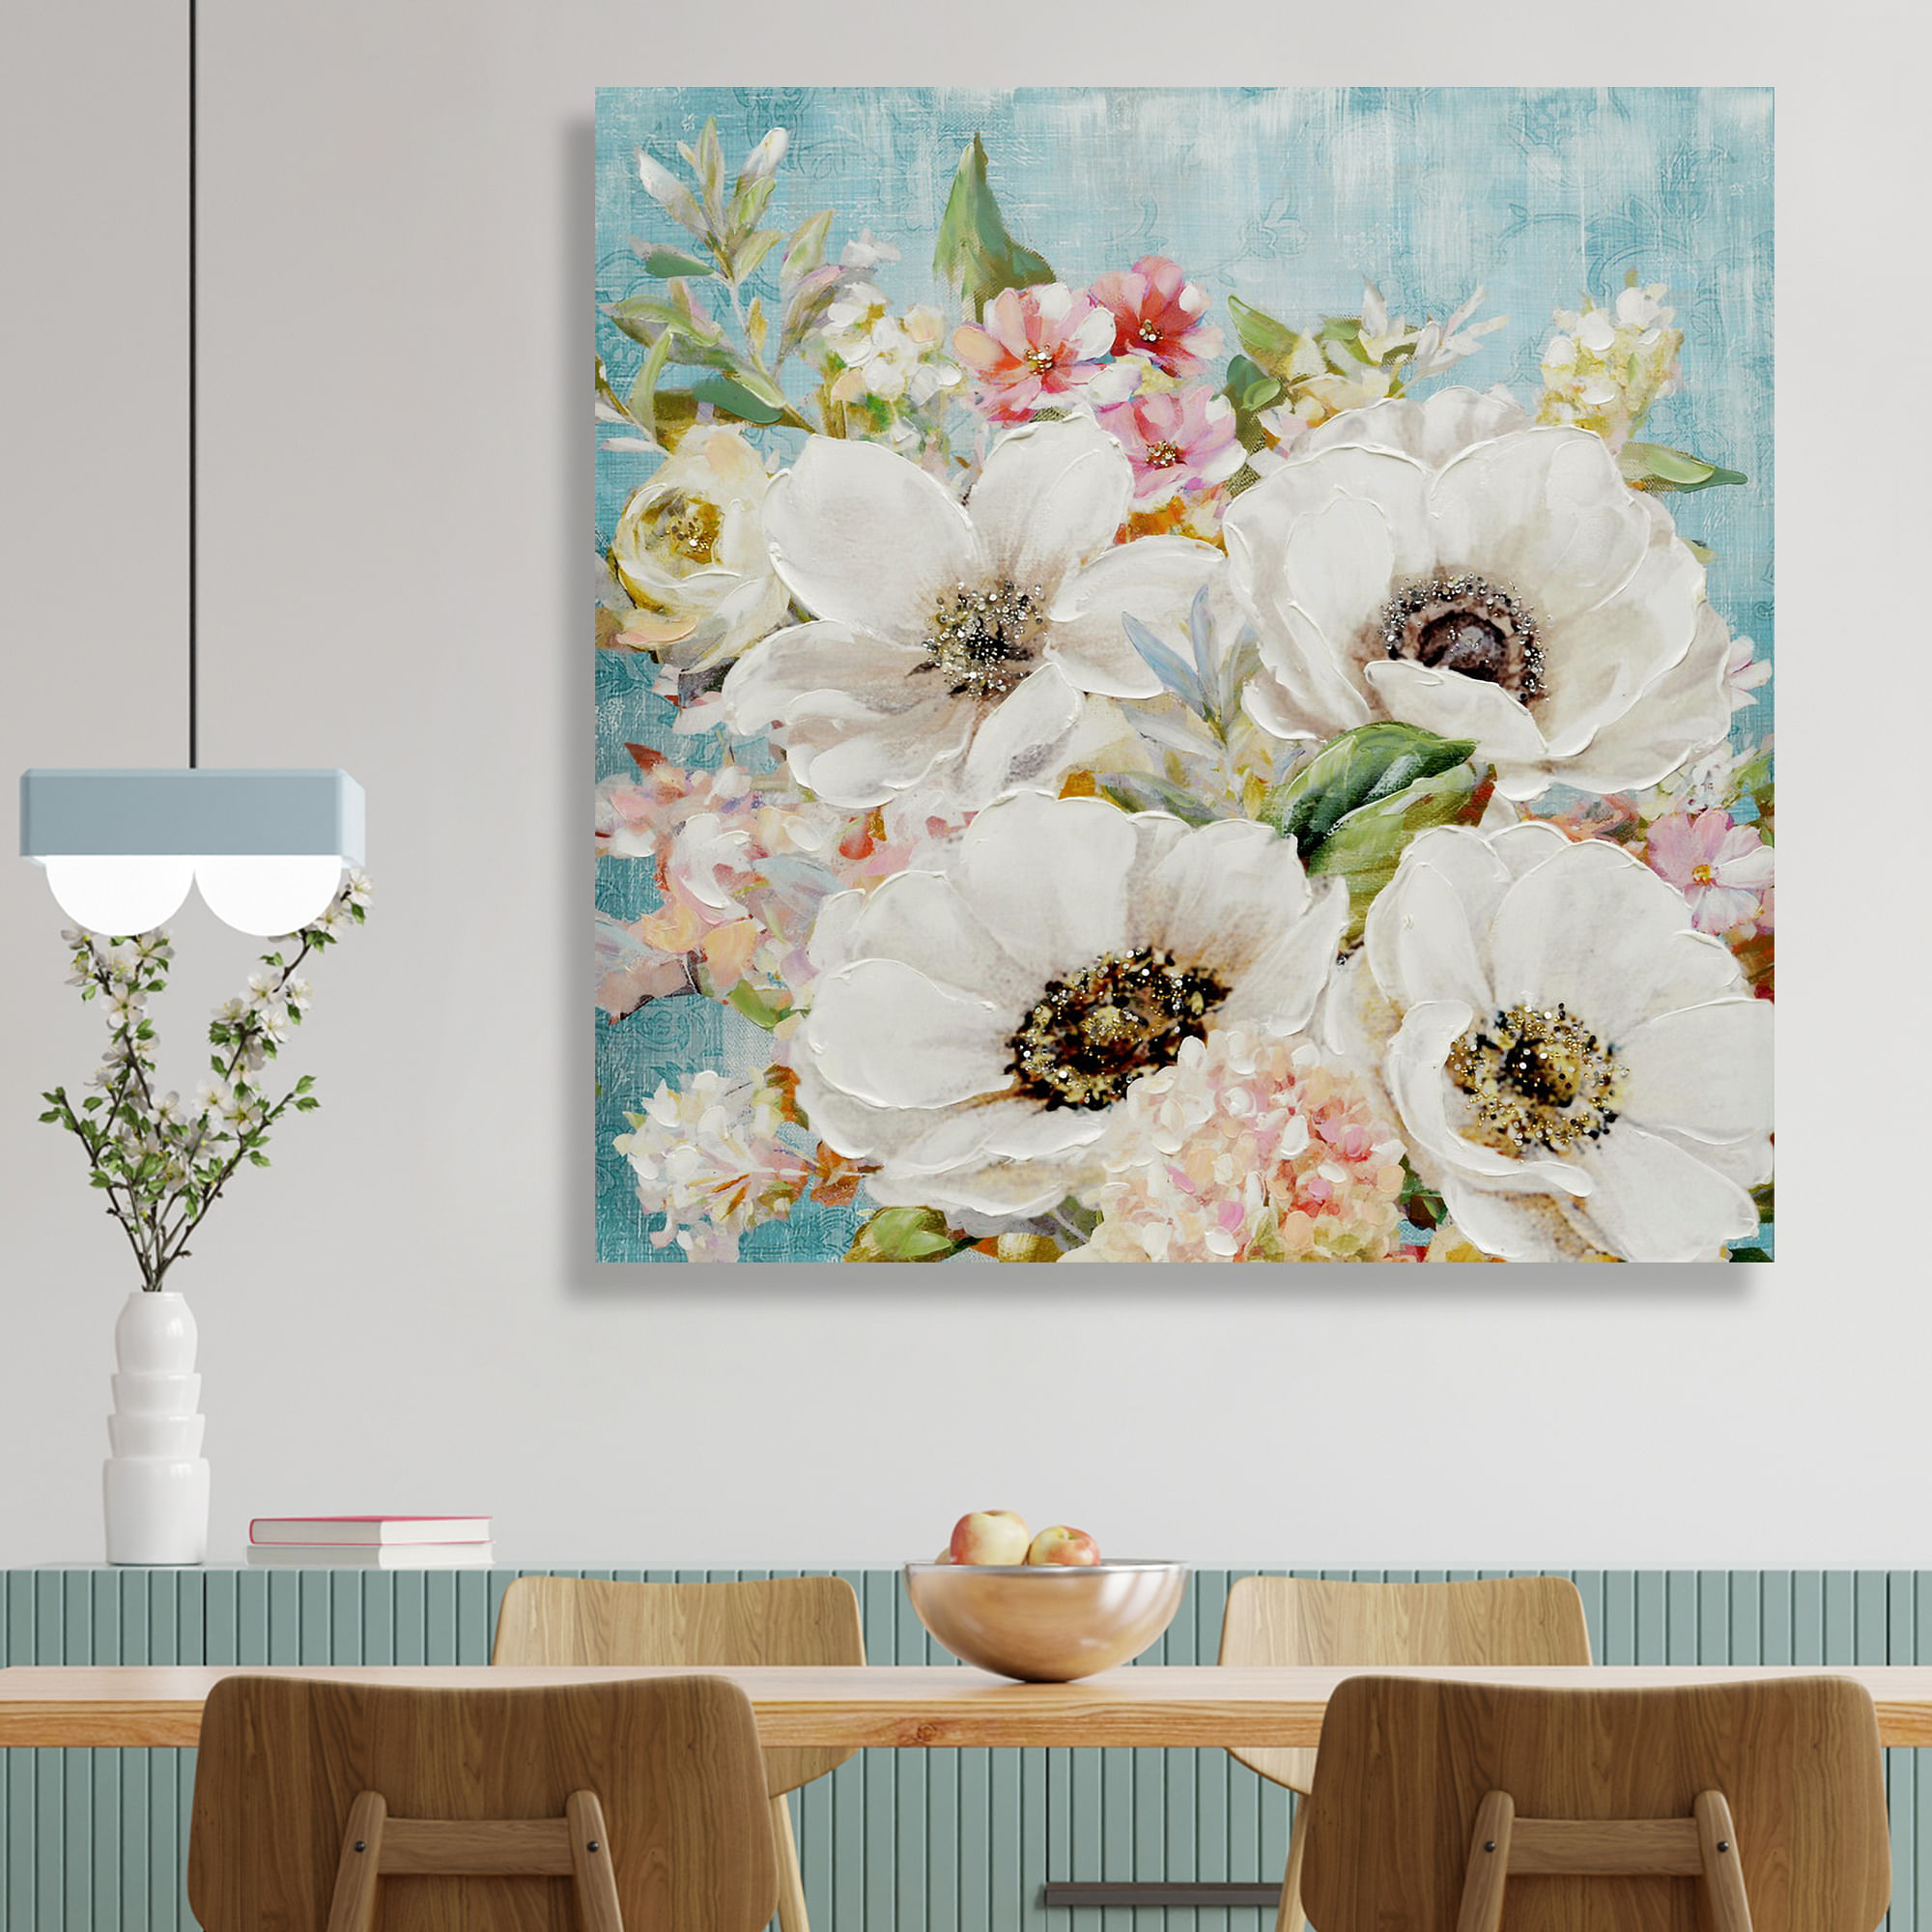 Ilona  Fancy Flowers  Handmade Canvas Painting With Glitter 100x100 Cm in White Colour